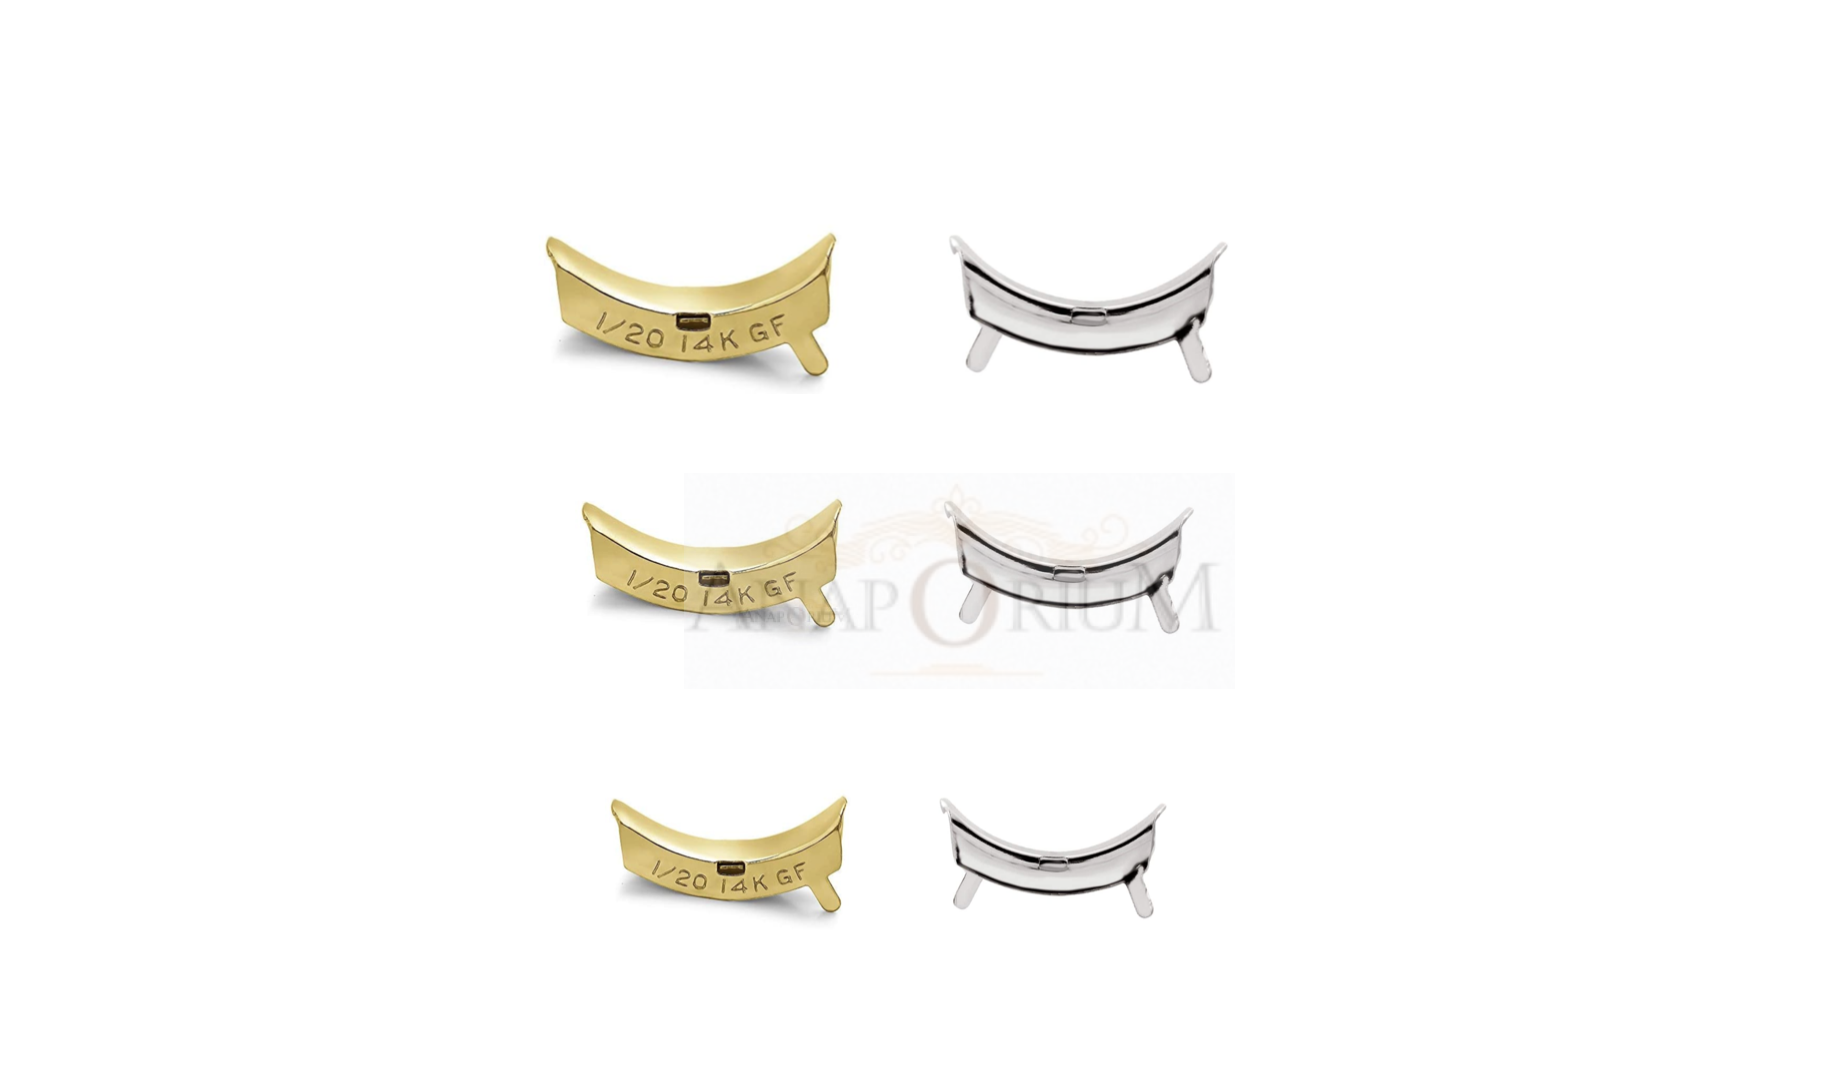 4X White/Yellow Gold Filled Ring Guard Size Adjuster-FOR custom